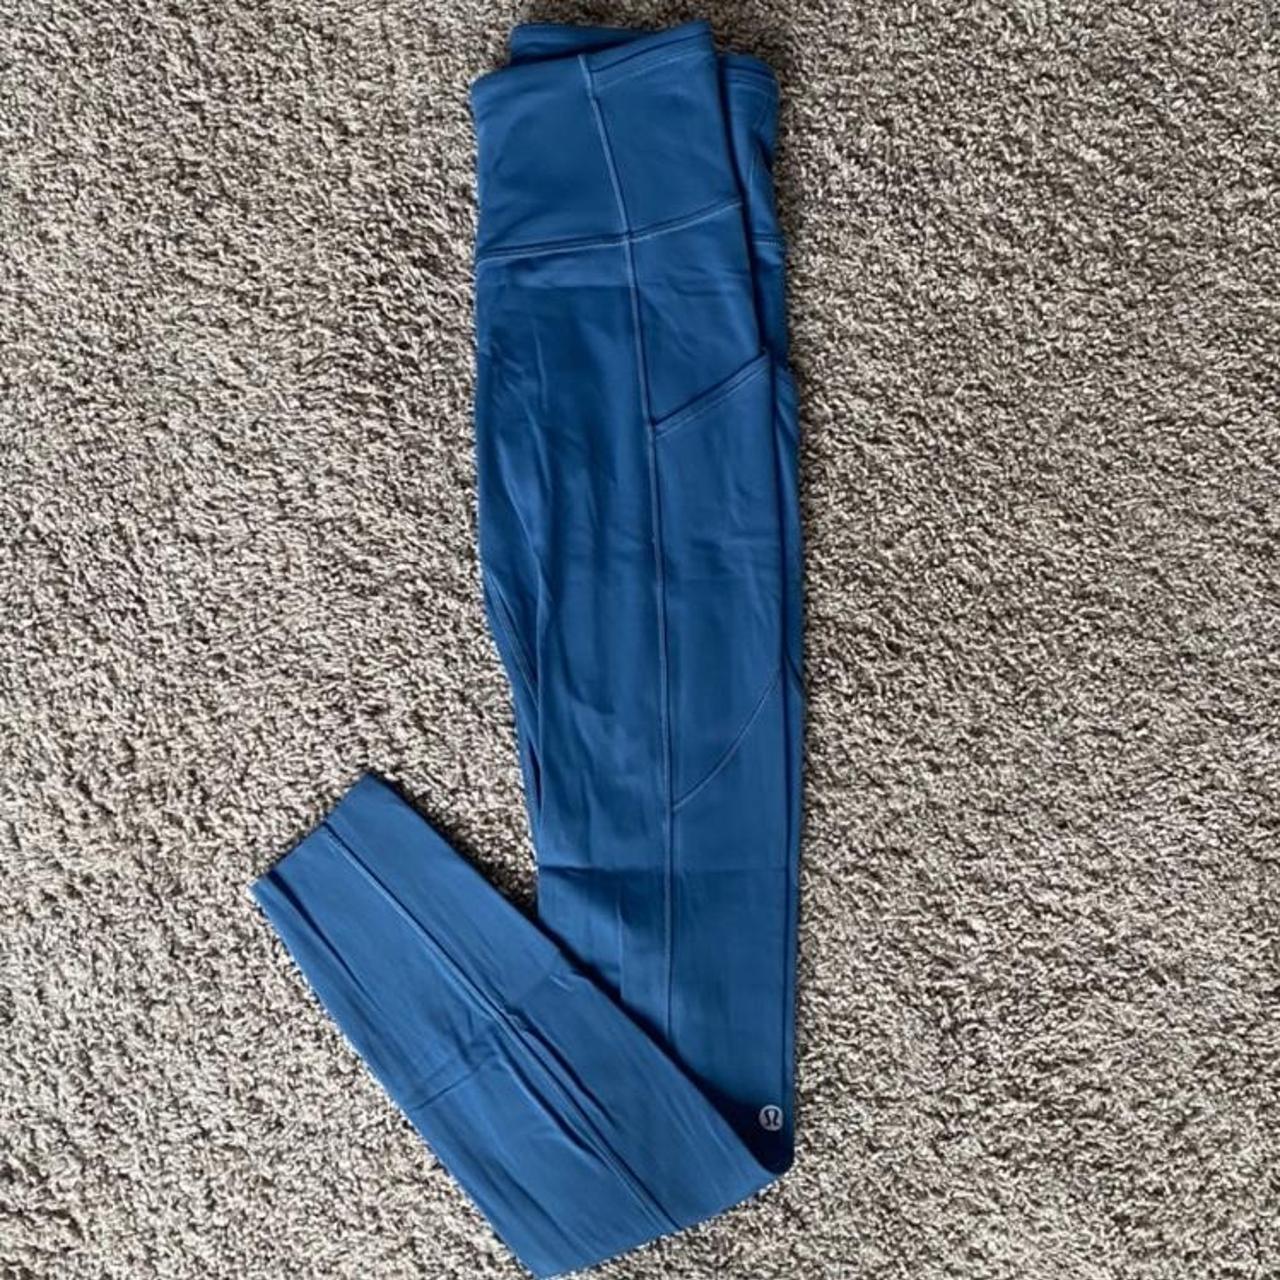 Super cute Lululemon 28” Fast and Free Tight.